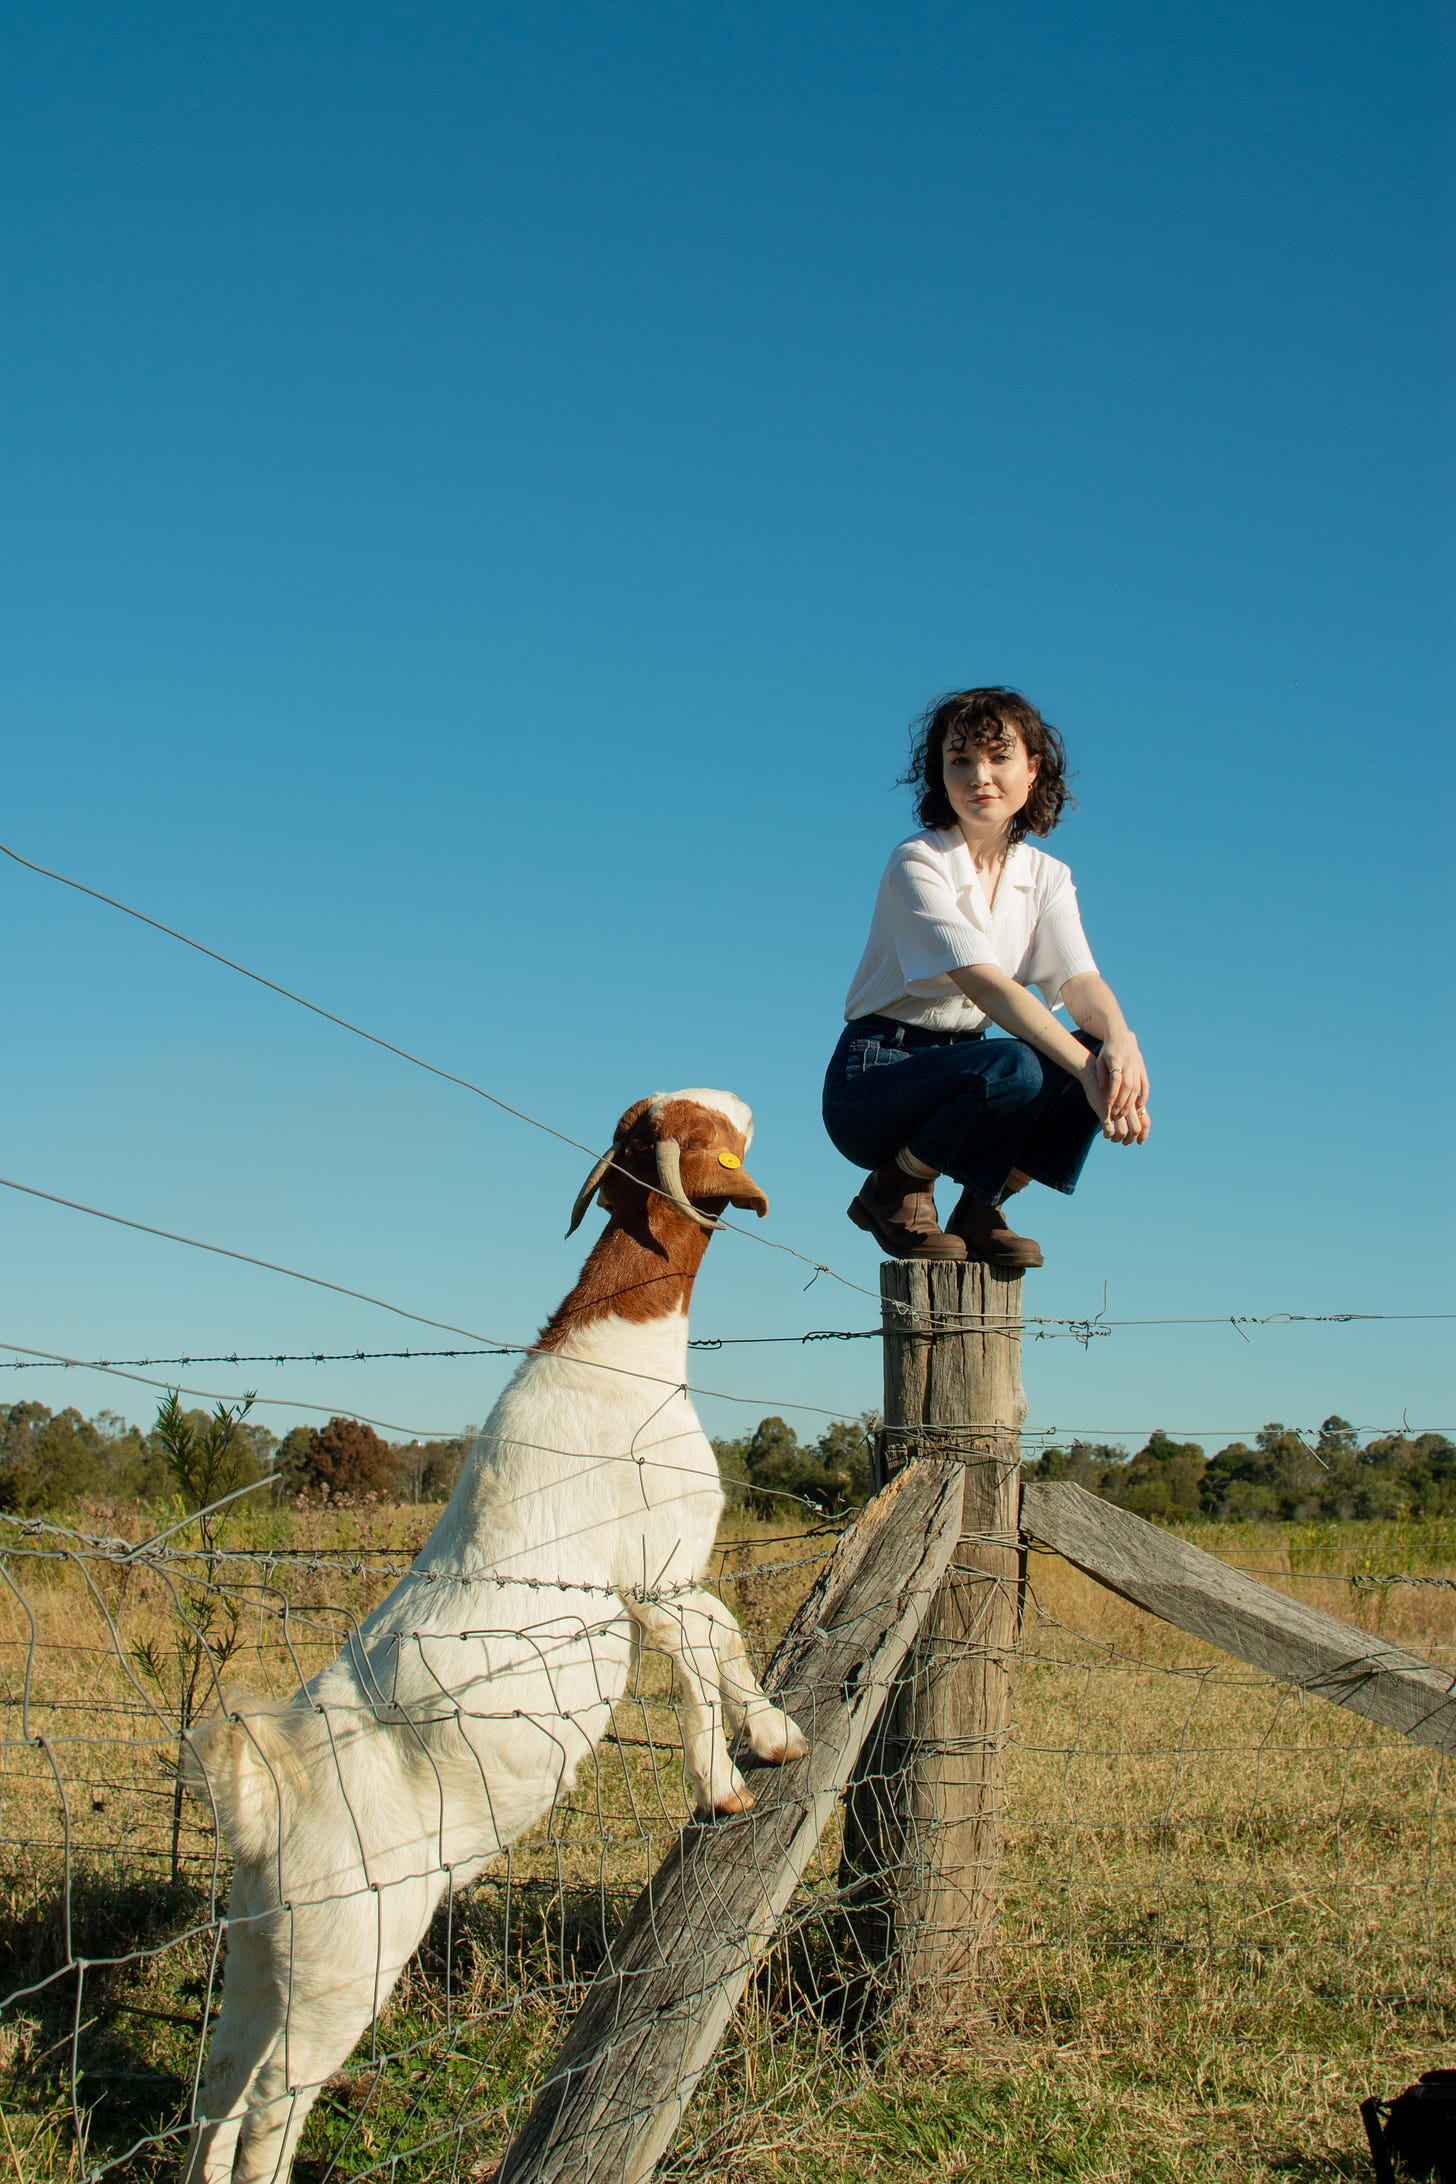 A shot Maggie took of her friend sitting on a fence in Frilly, with a goat standing up on its back legs toward her